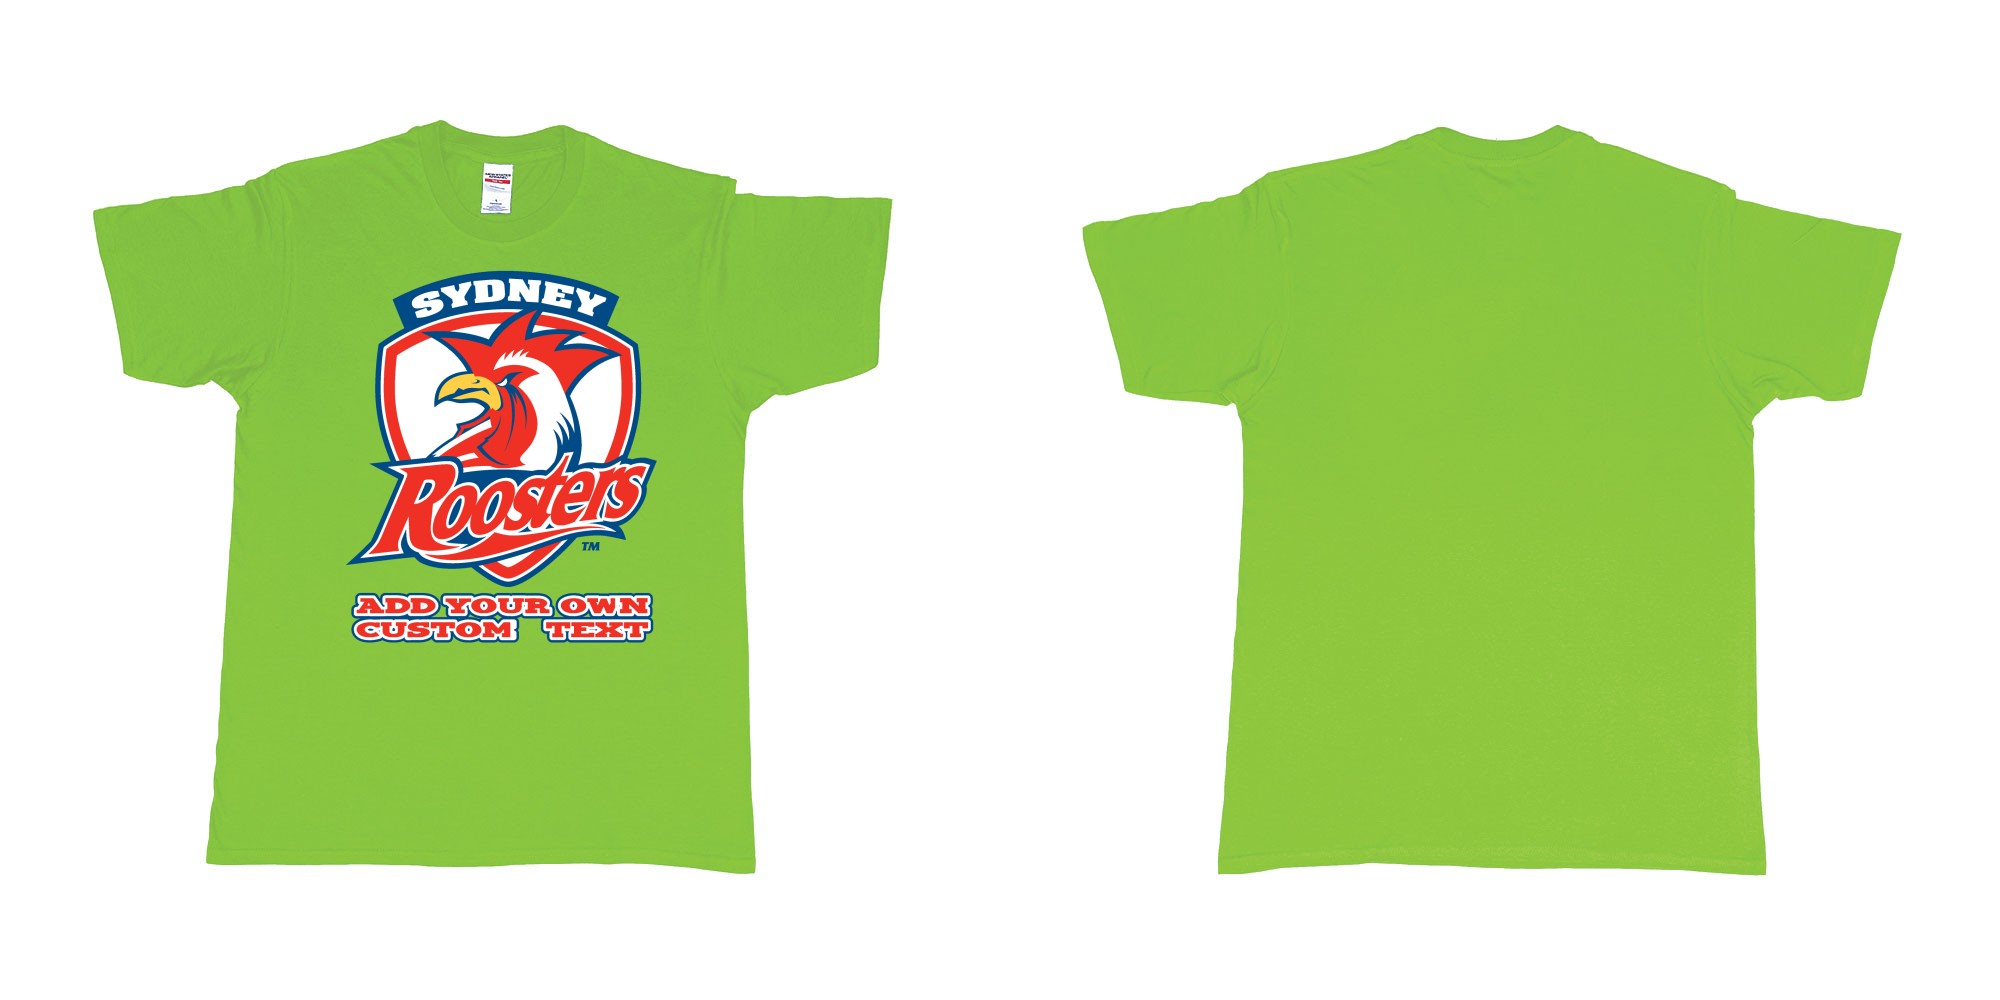 Custom tshirt design sydney roosters custom NRL design in fabric color lime choice your own text made in Bali by The Pirate Way